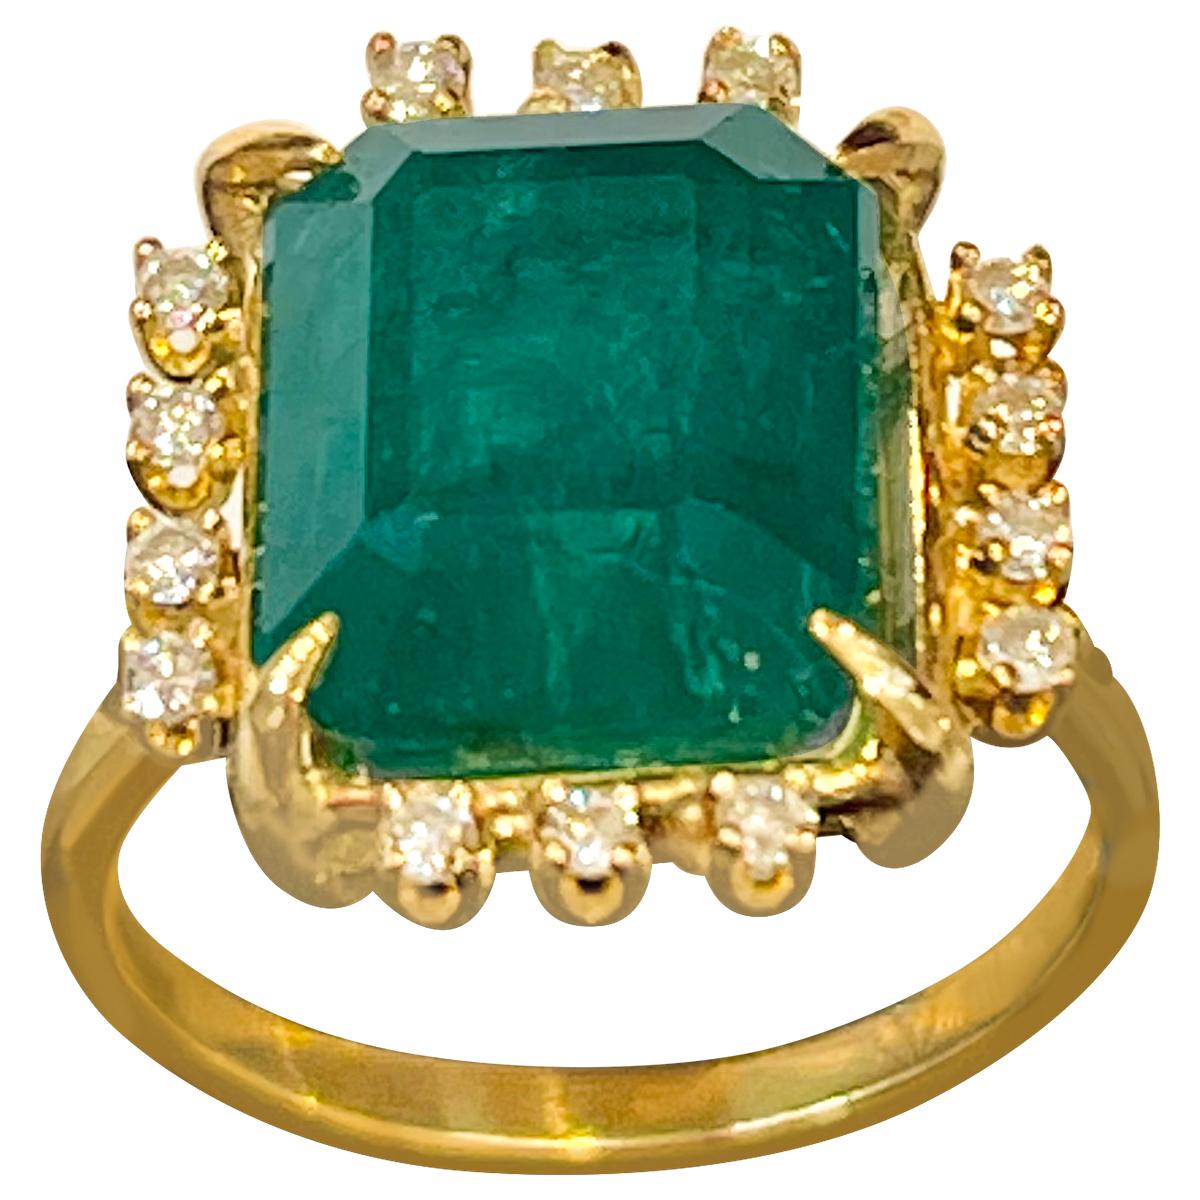 A classic, Vintage ring 
Approximately  4.5 Carat Natural Emerald  Cut Emerald & Diamond Ring 14 Karat Yellow  Gold Size 4.2
Intense green color, Beautiful stone with shine and luster  but has small  inclusions as all natural emeralds have